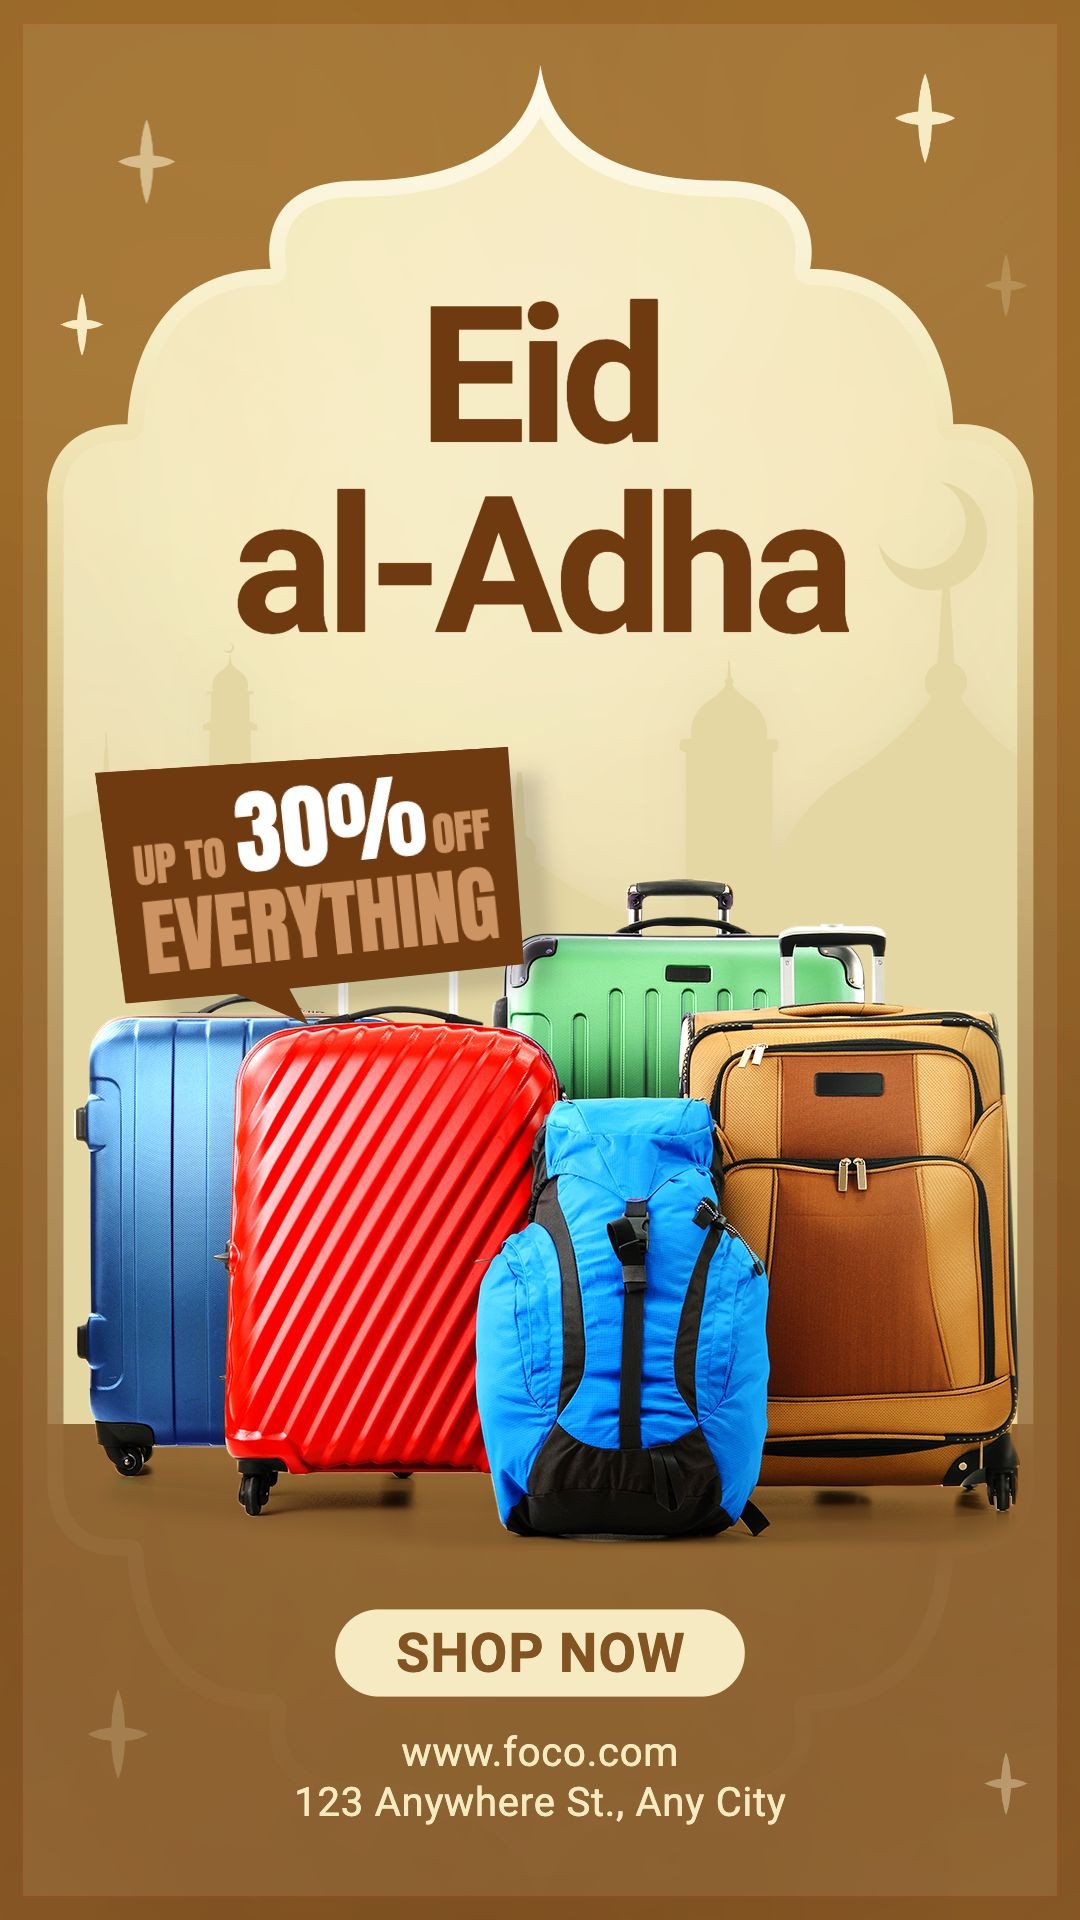 Eid al-Adha Travel Suitcases and Luggages Discount Sale Promotion Ecommerce Story